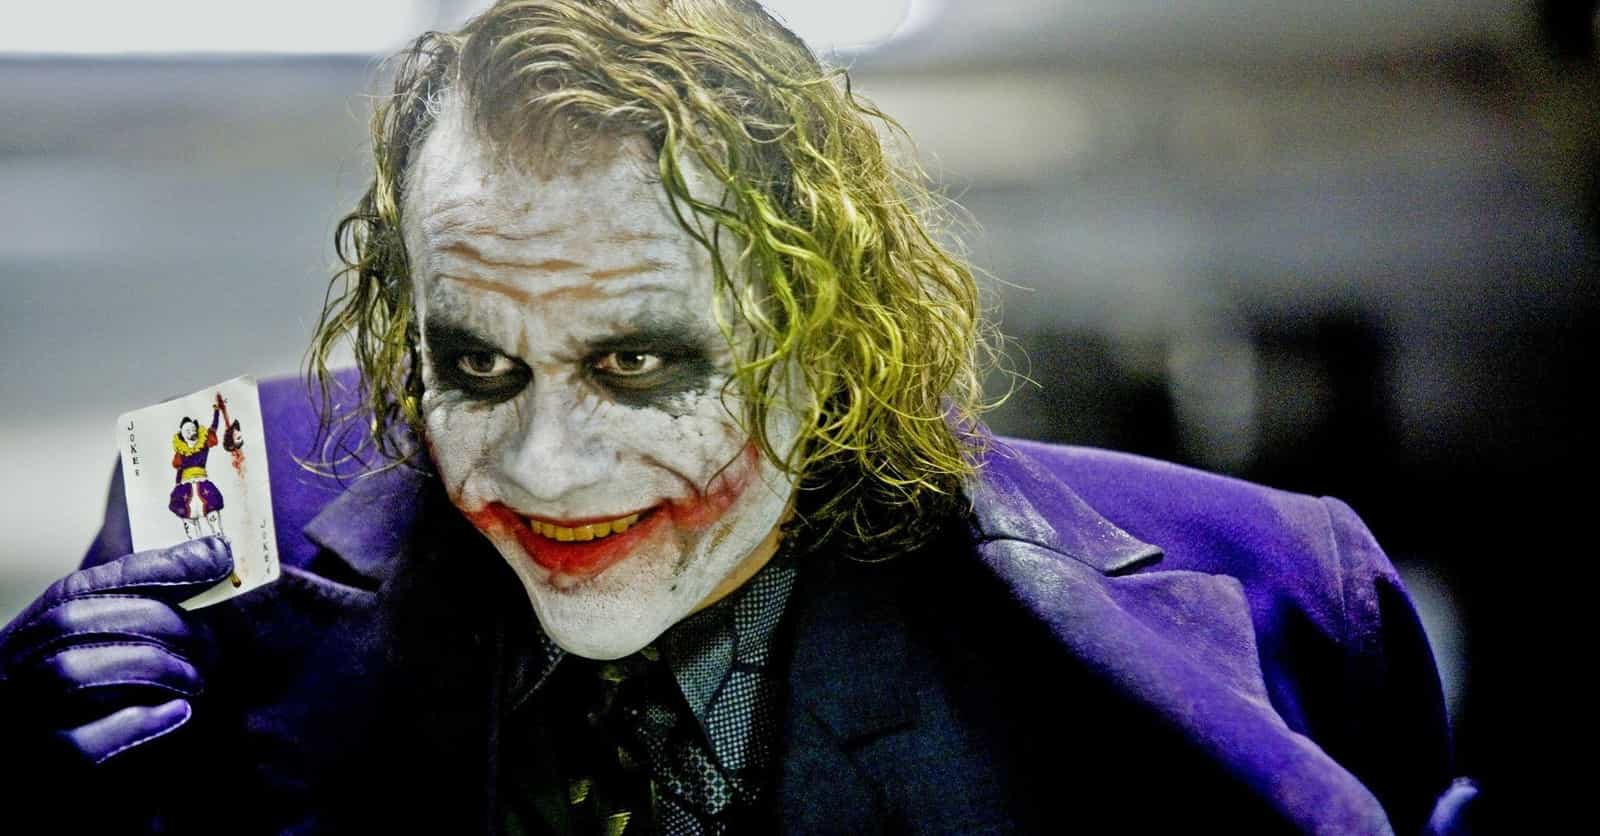 Things You Probably Didn't Know About The Joker